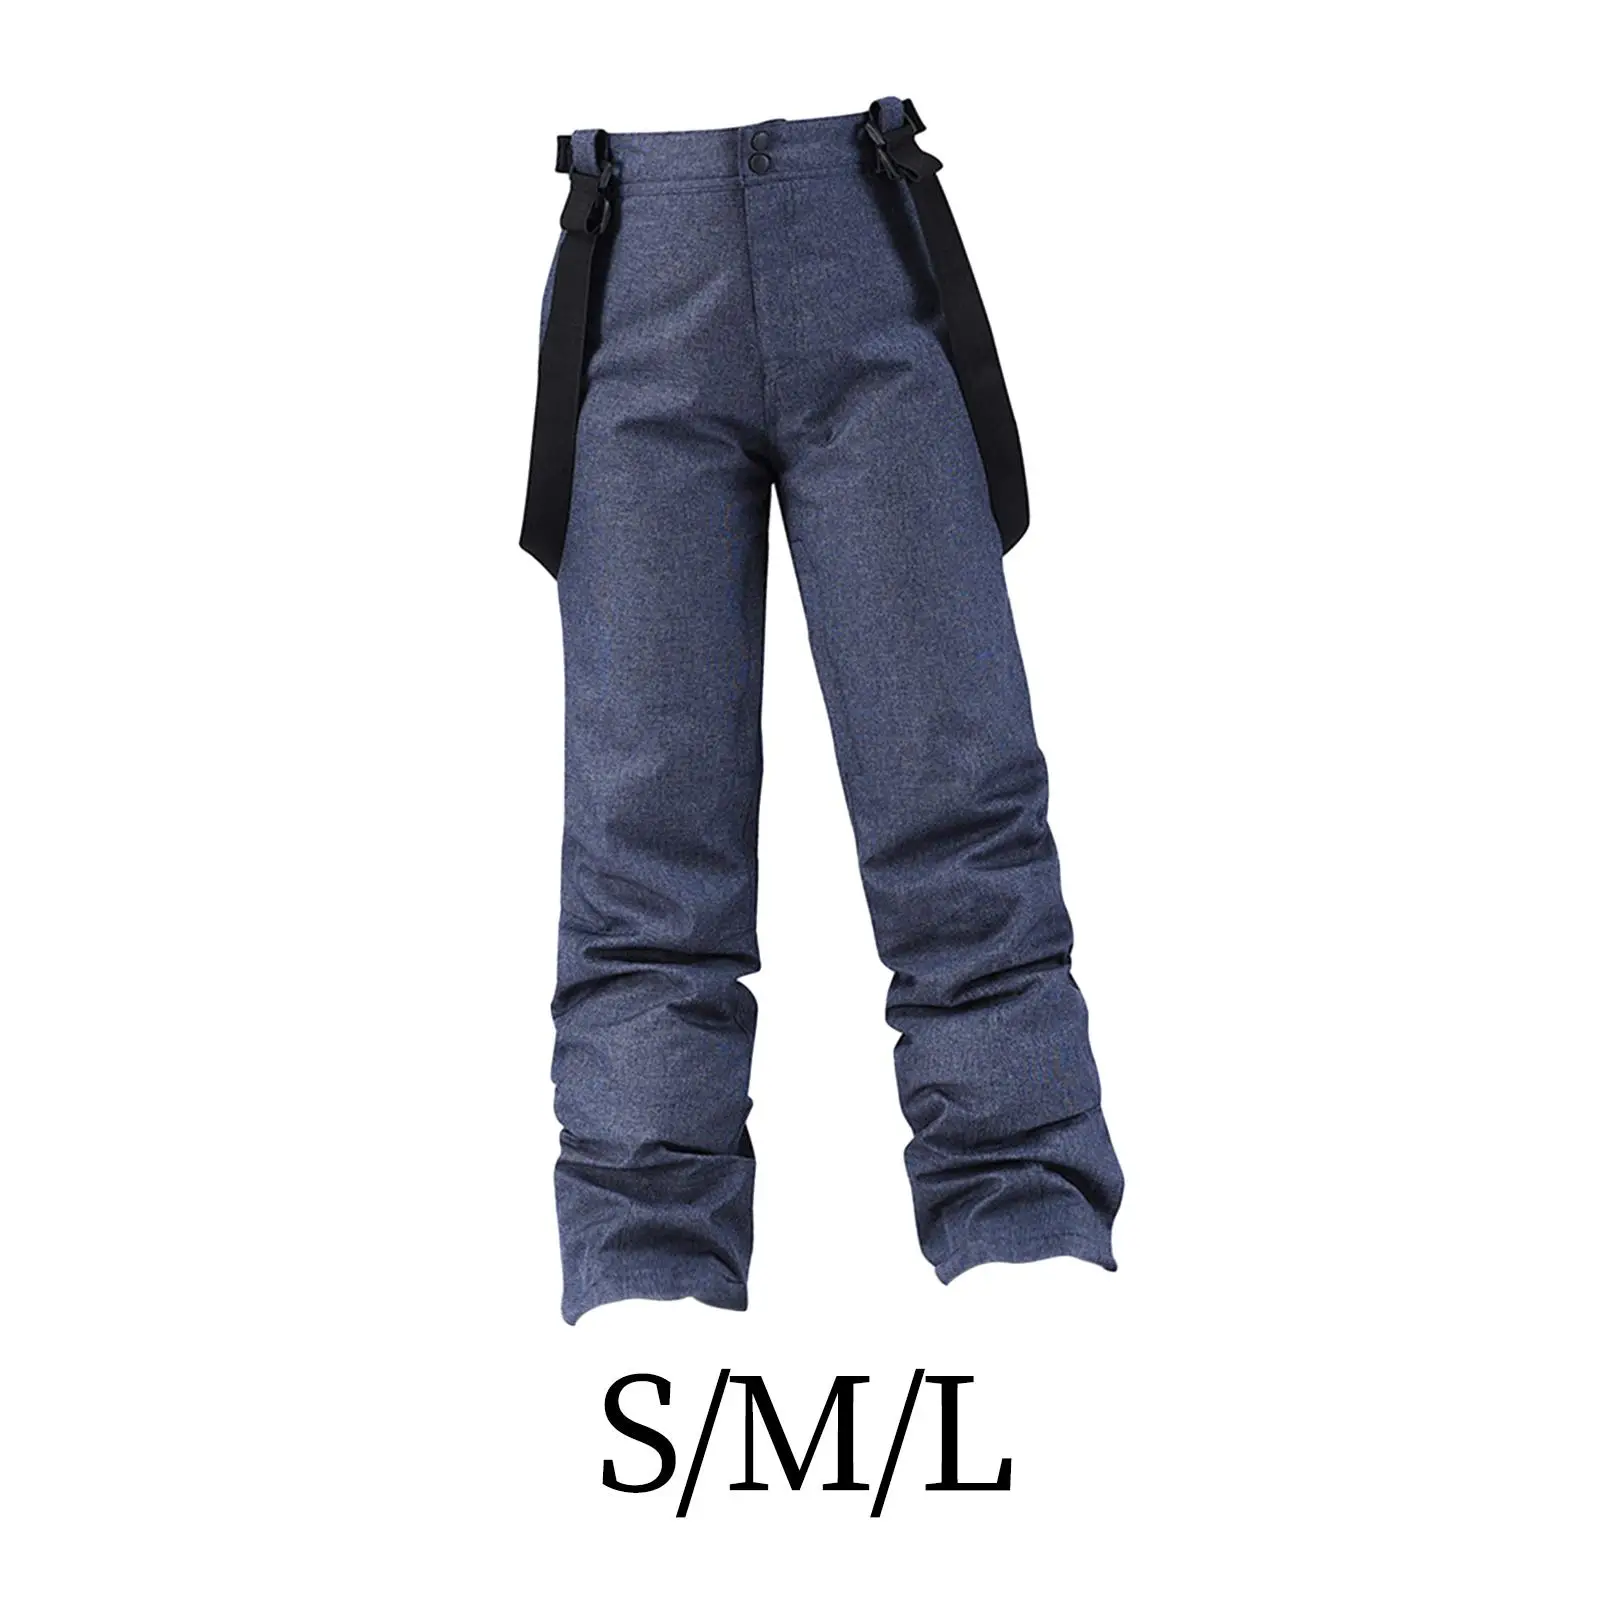 Snow Ski Pants Warm Insulated Windproof Unisex Full Length Outdoor Winter